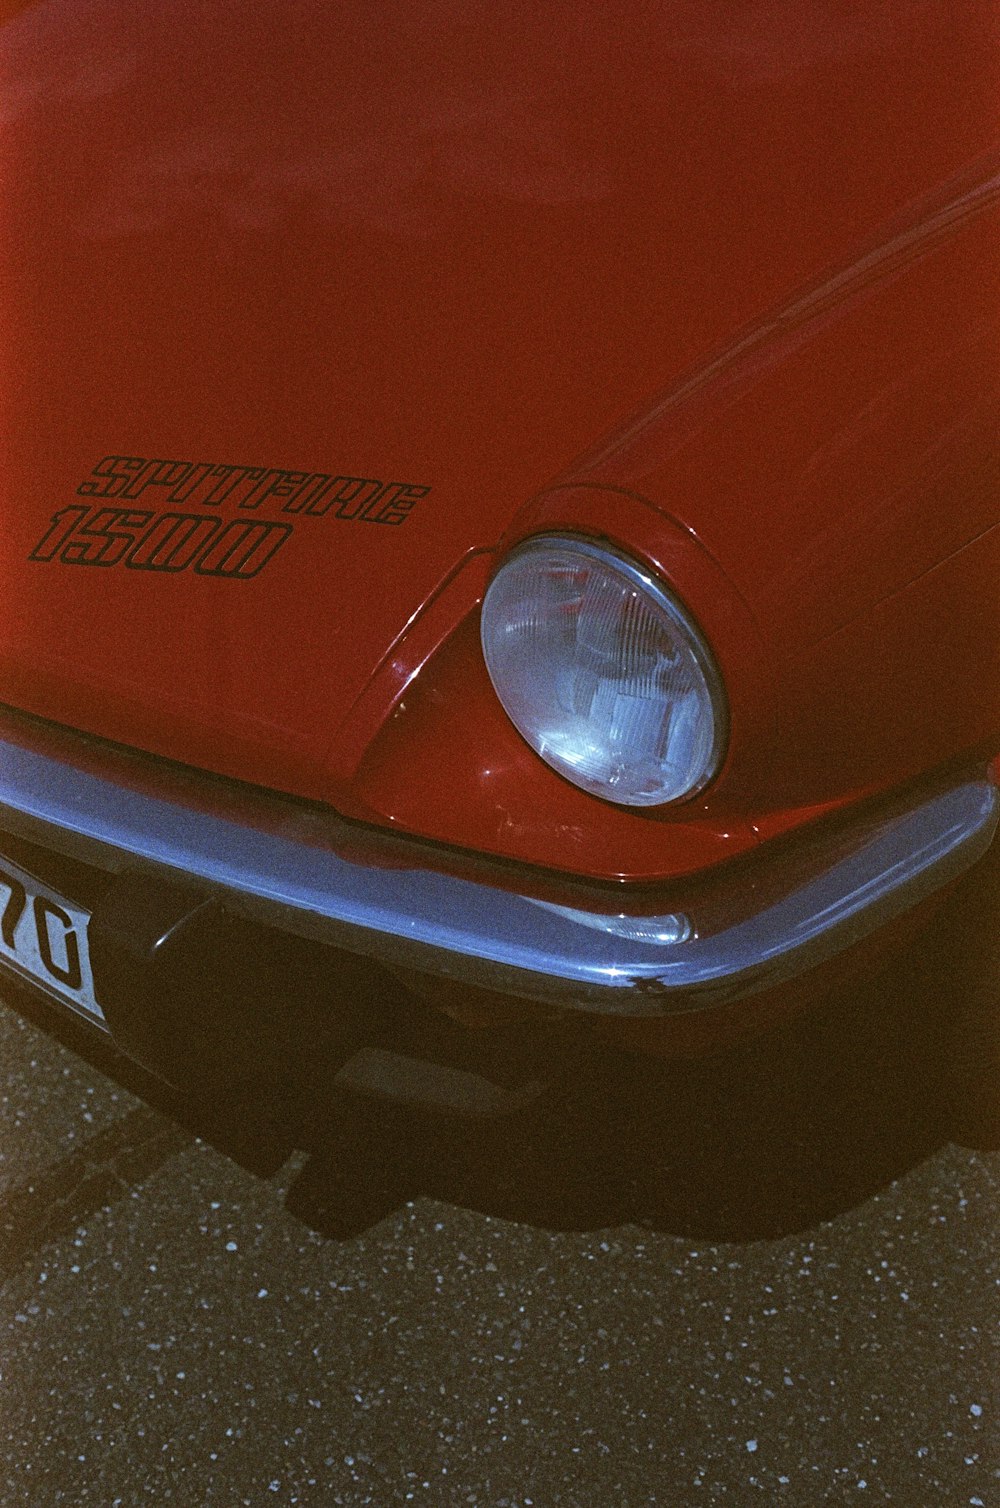 a close up of the front of a red car